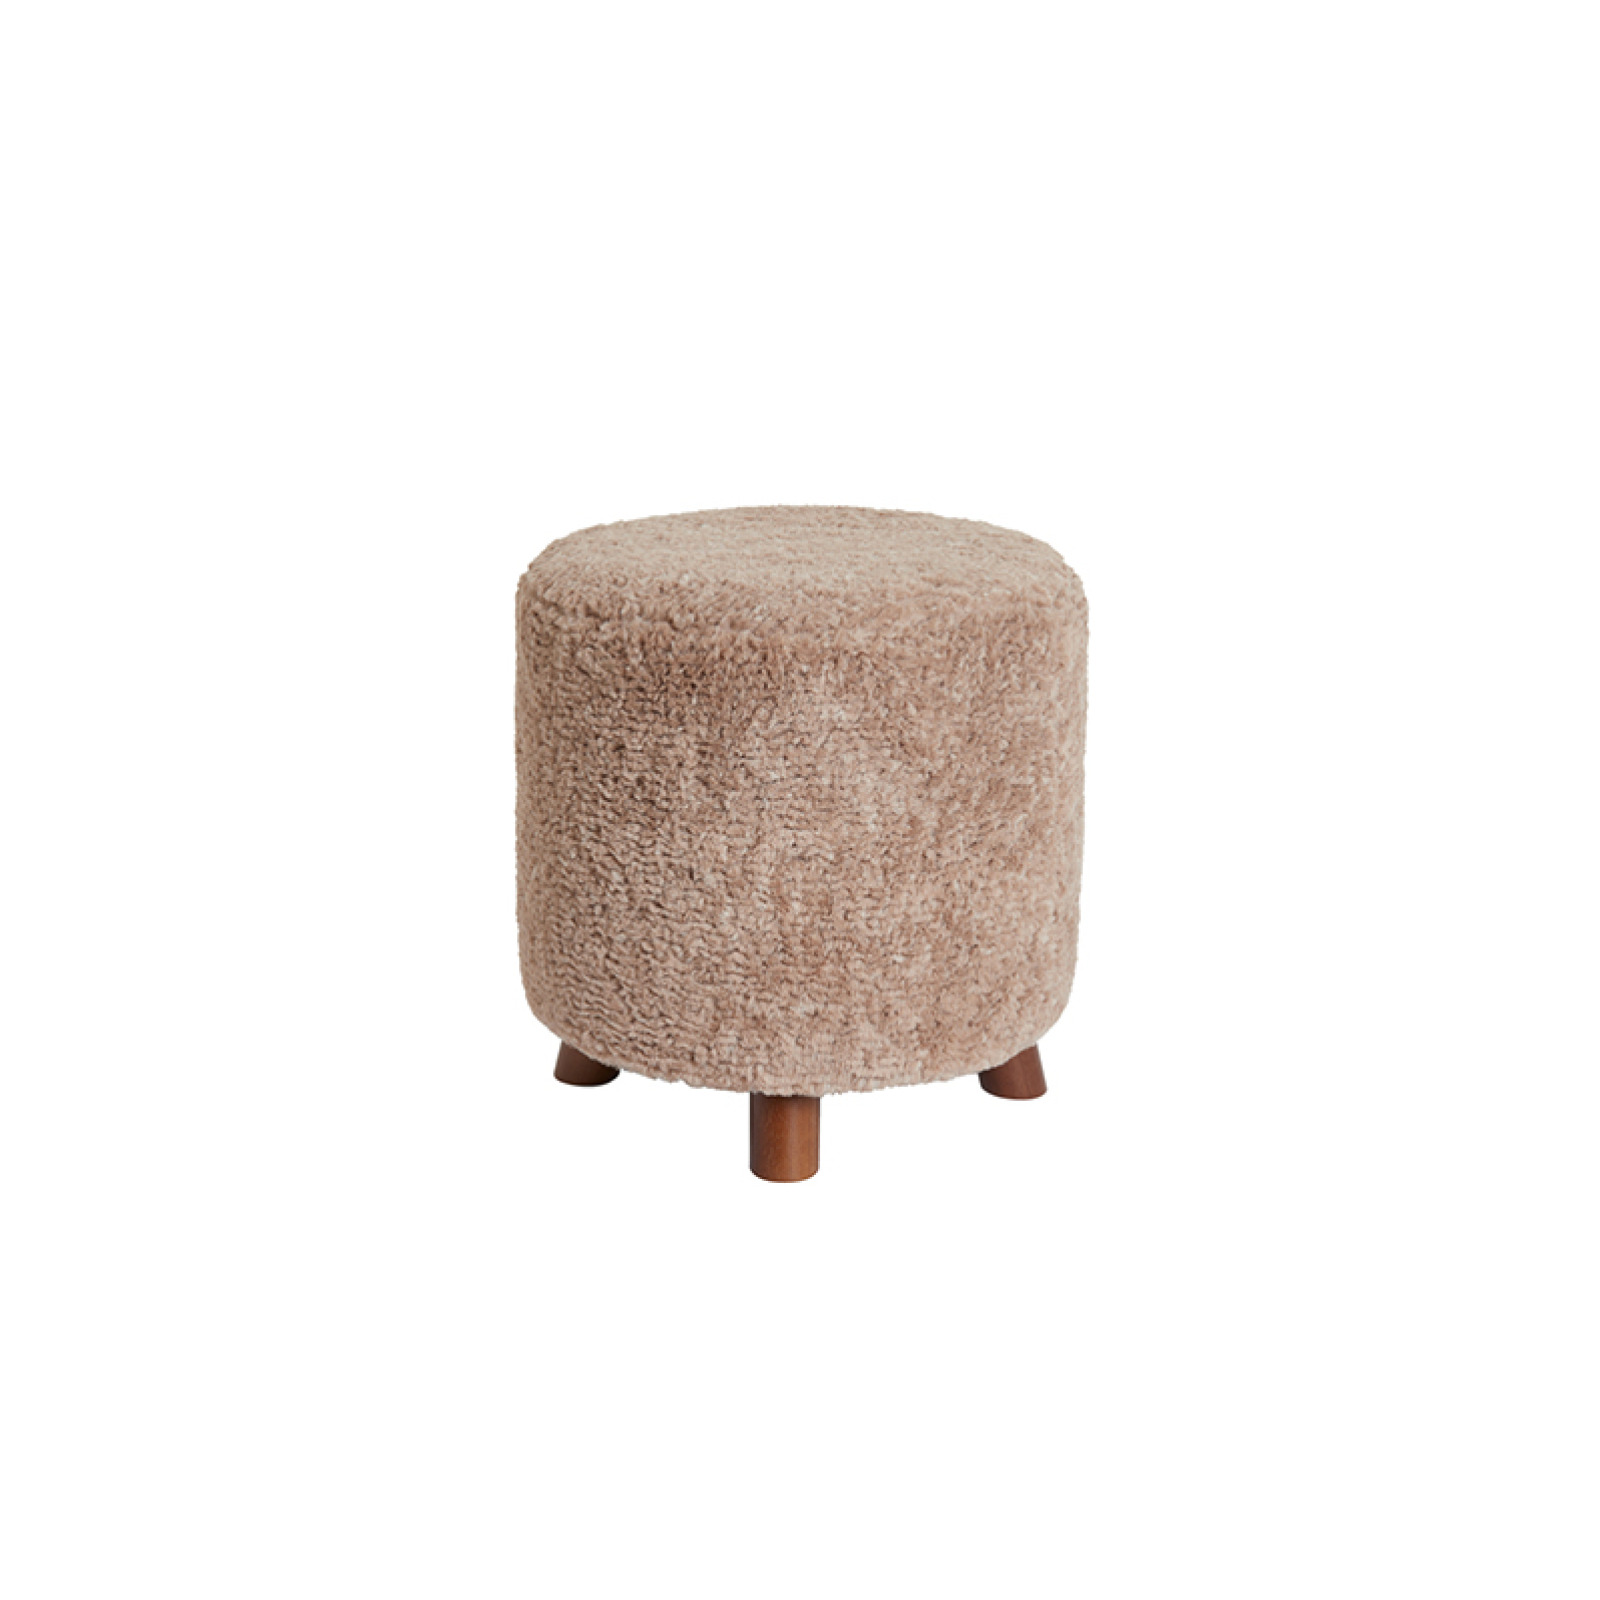 Polly brown stool